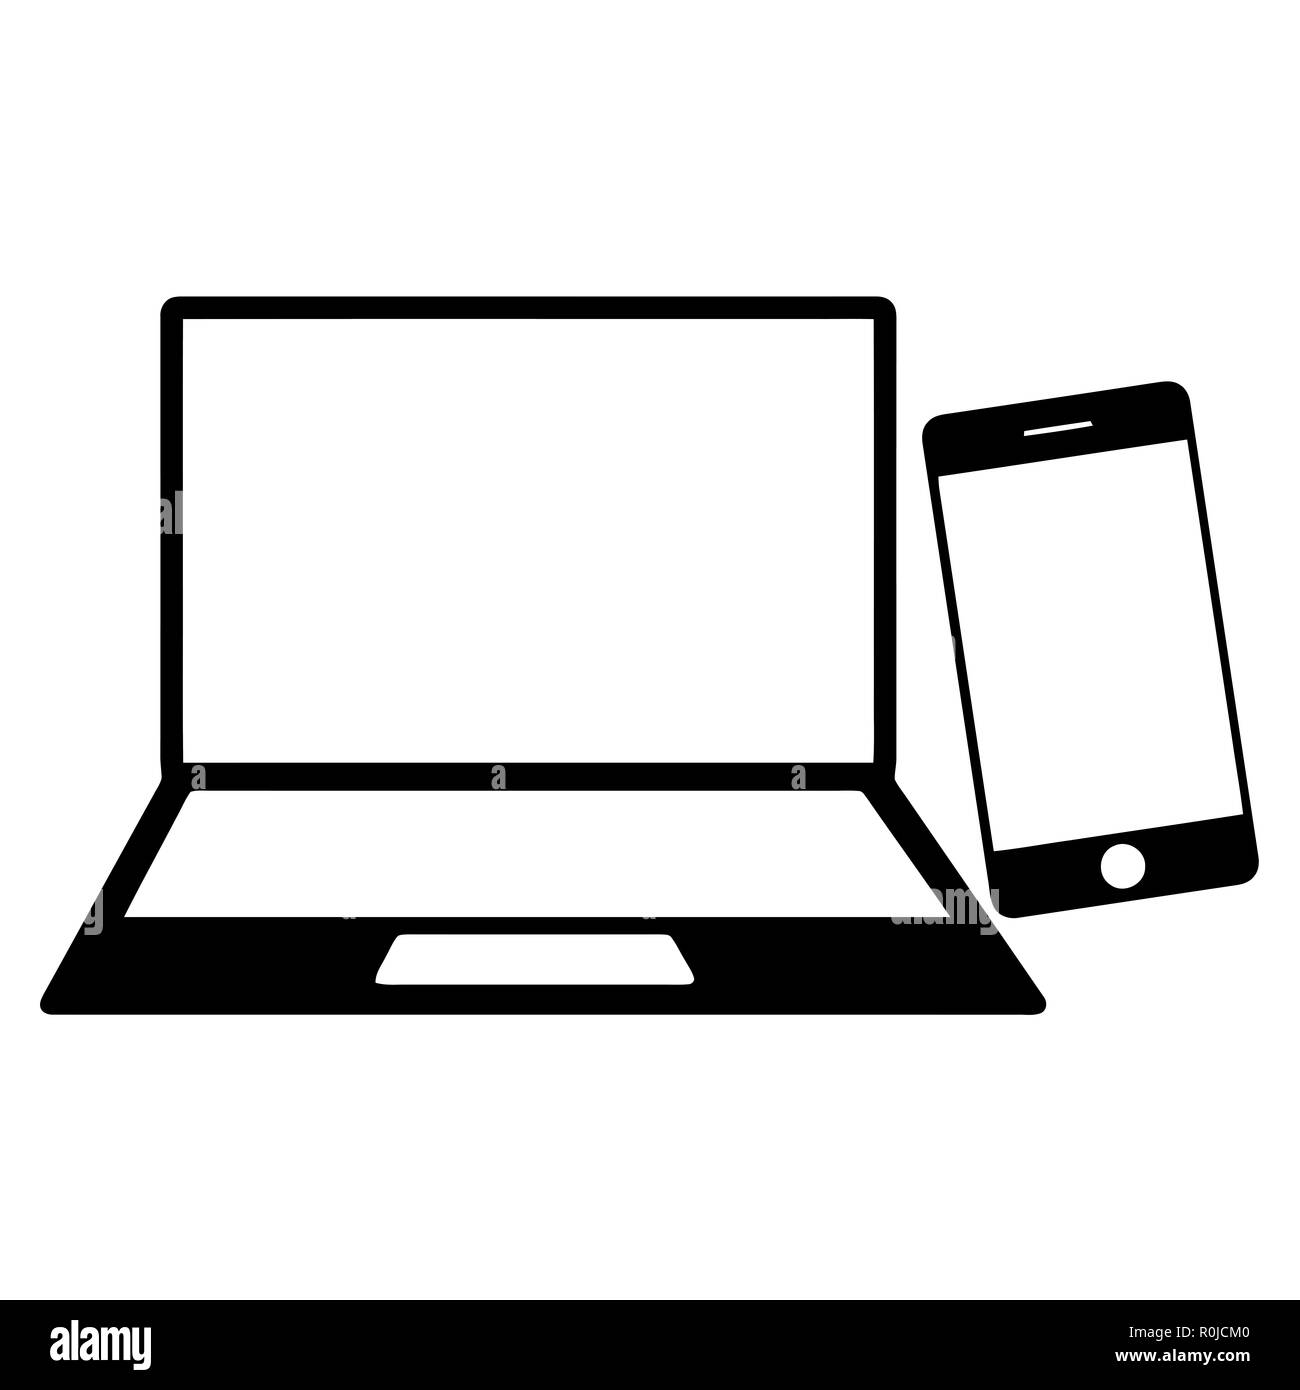 laptop mobile electronic notebook site web silhouette illustration Stock Photo